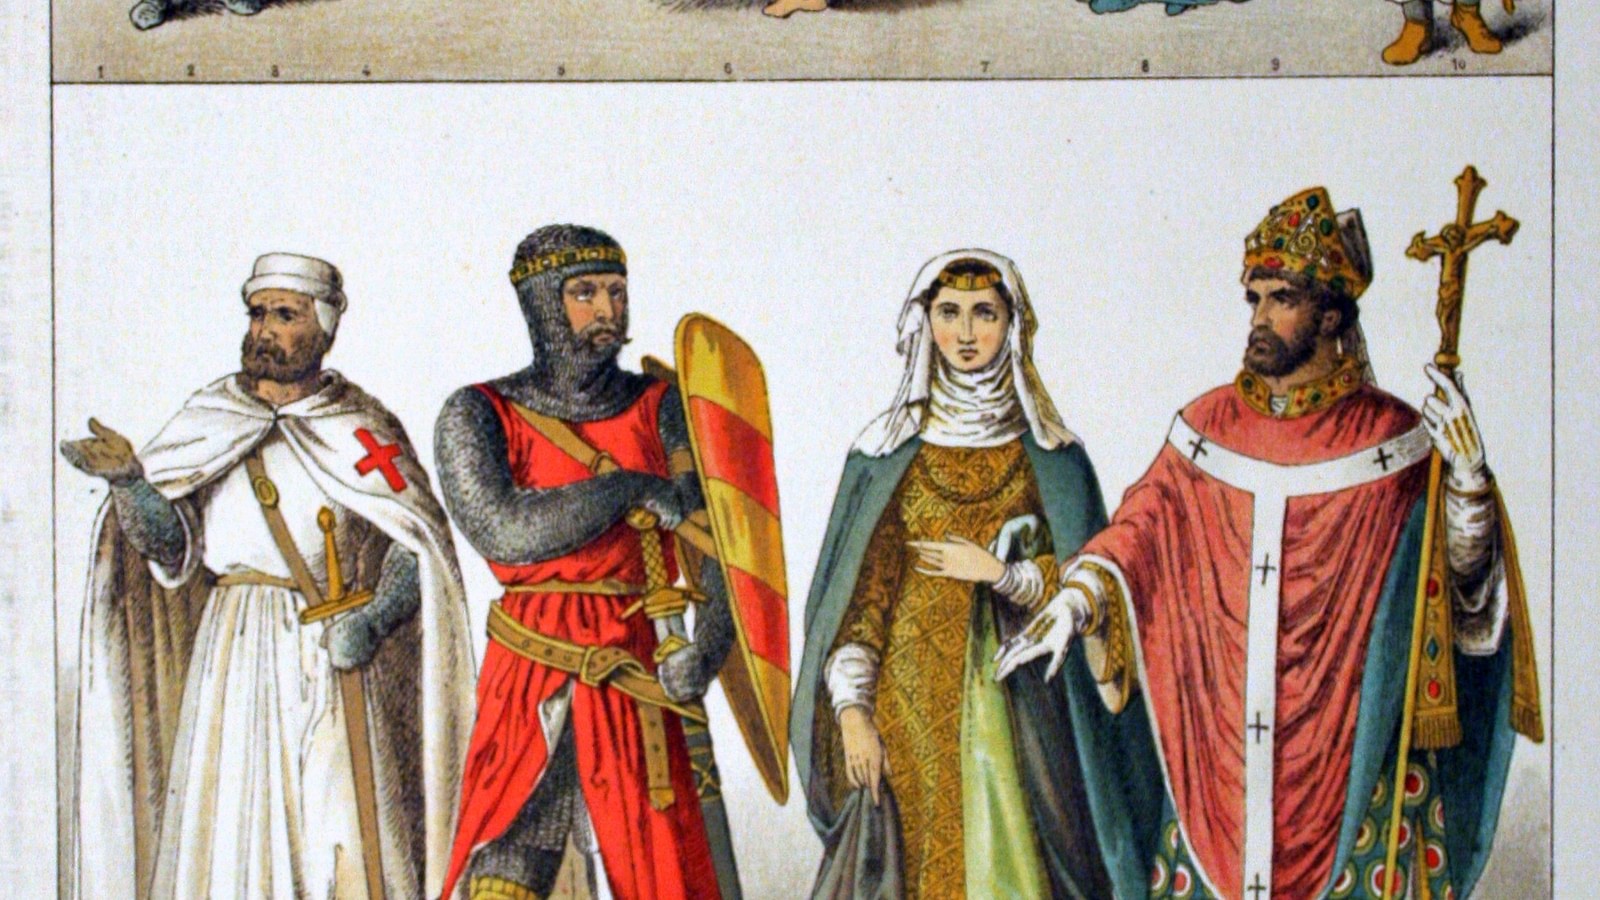 Fashion and Dress in the Middle Ages